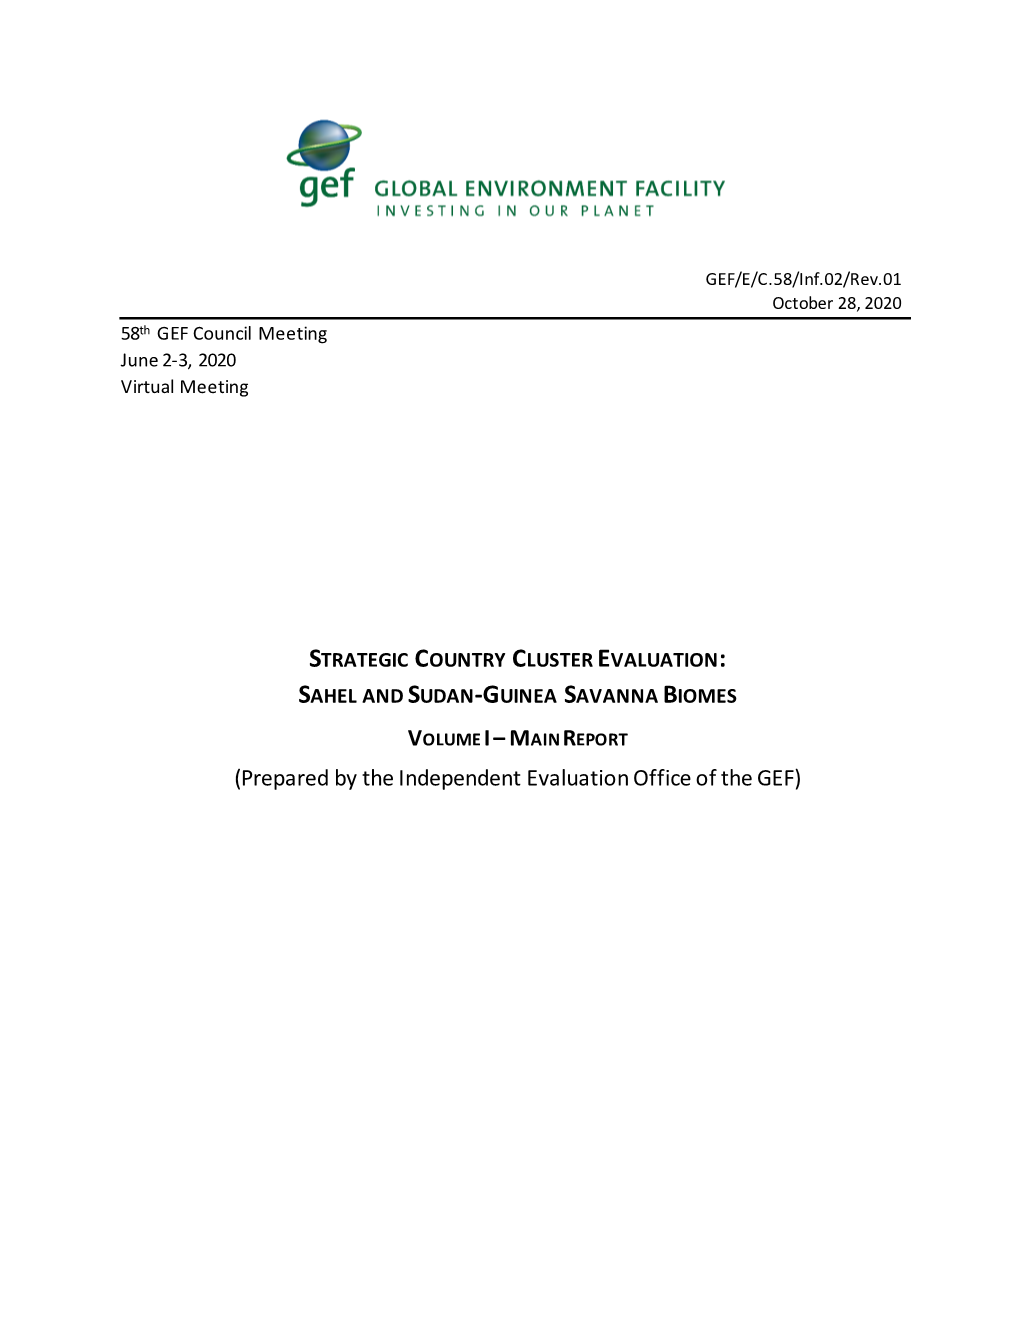 Prepared by the Independent Evaluation Office of the GEF